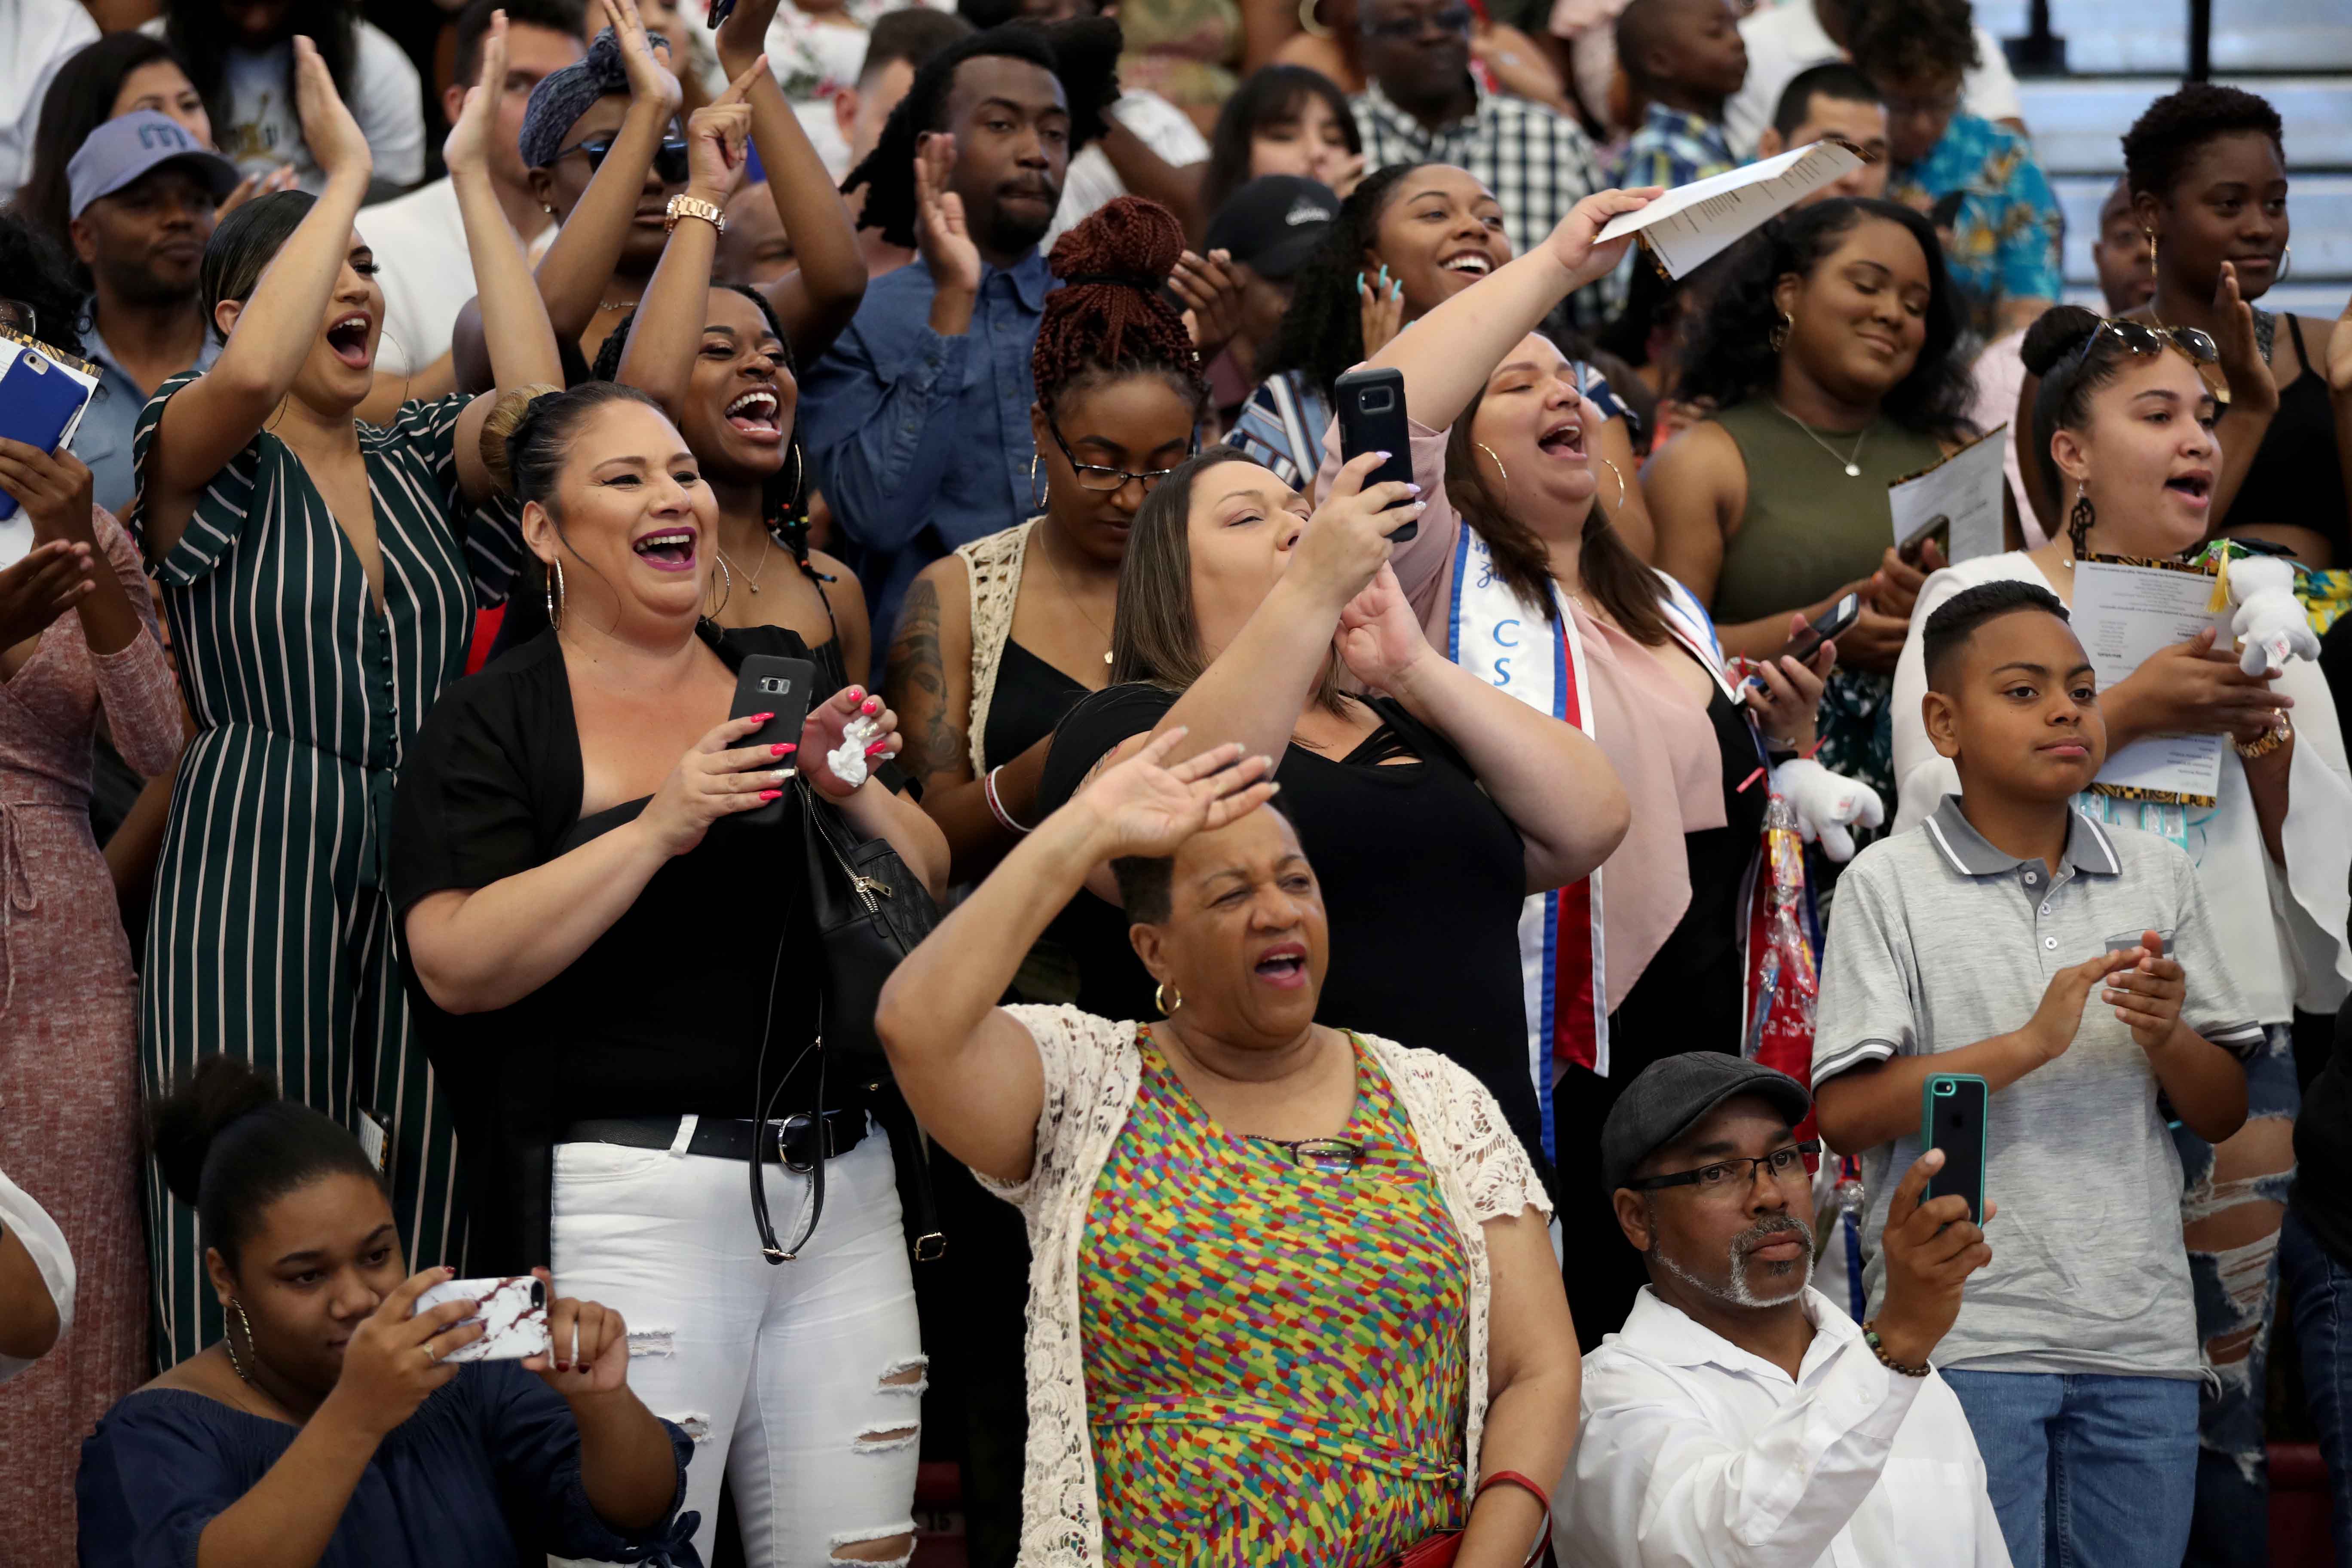 About 2,000 family, friends and supporters were at the arena to celebrate with the students.